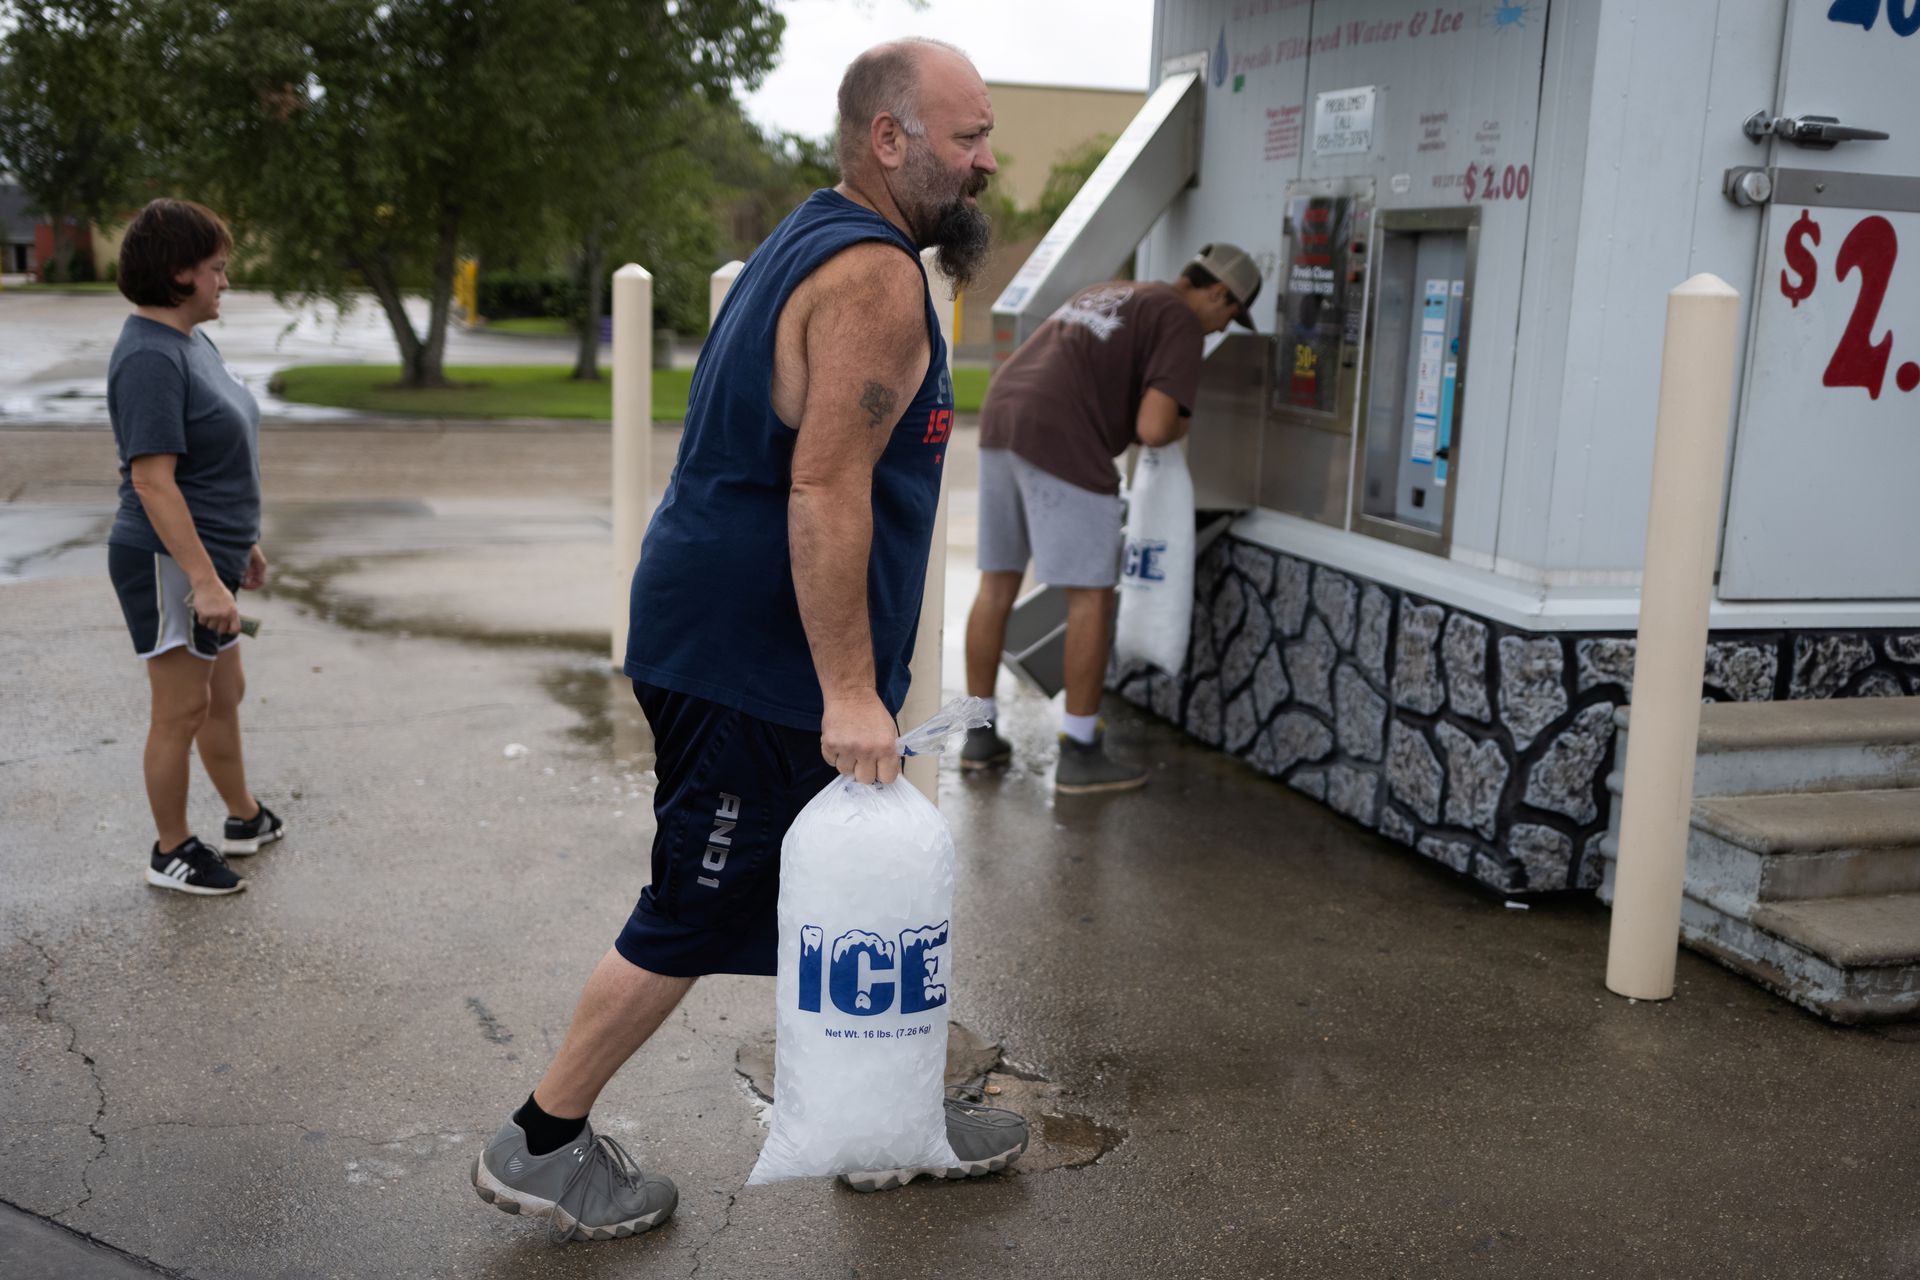 Local resident Mark Mayon carries a bag of ice past others while preparing for the arrival of Hurricane Ida in Morgan City, Louisiana, U.S., August 29, 2021. Photo: Reuters